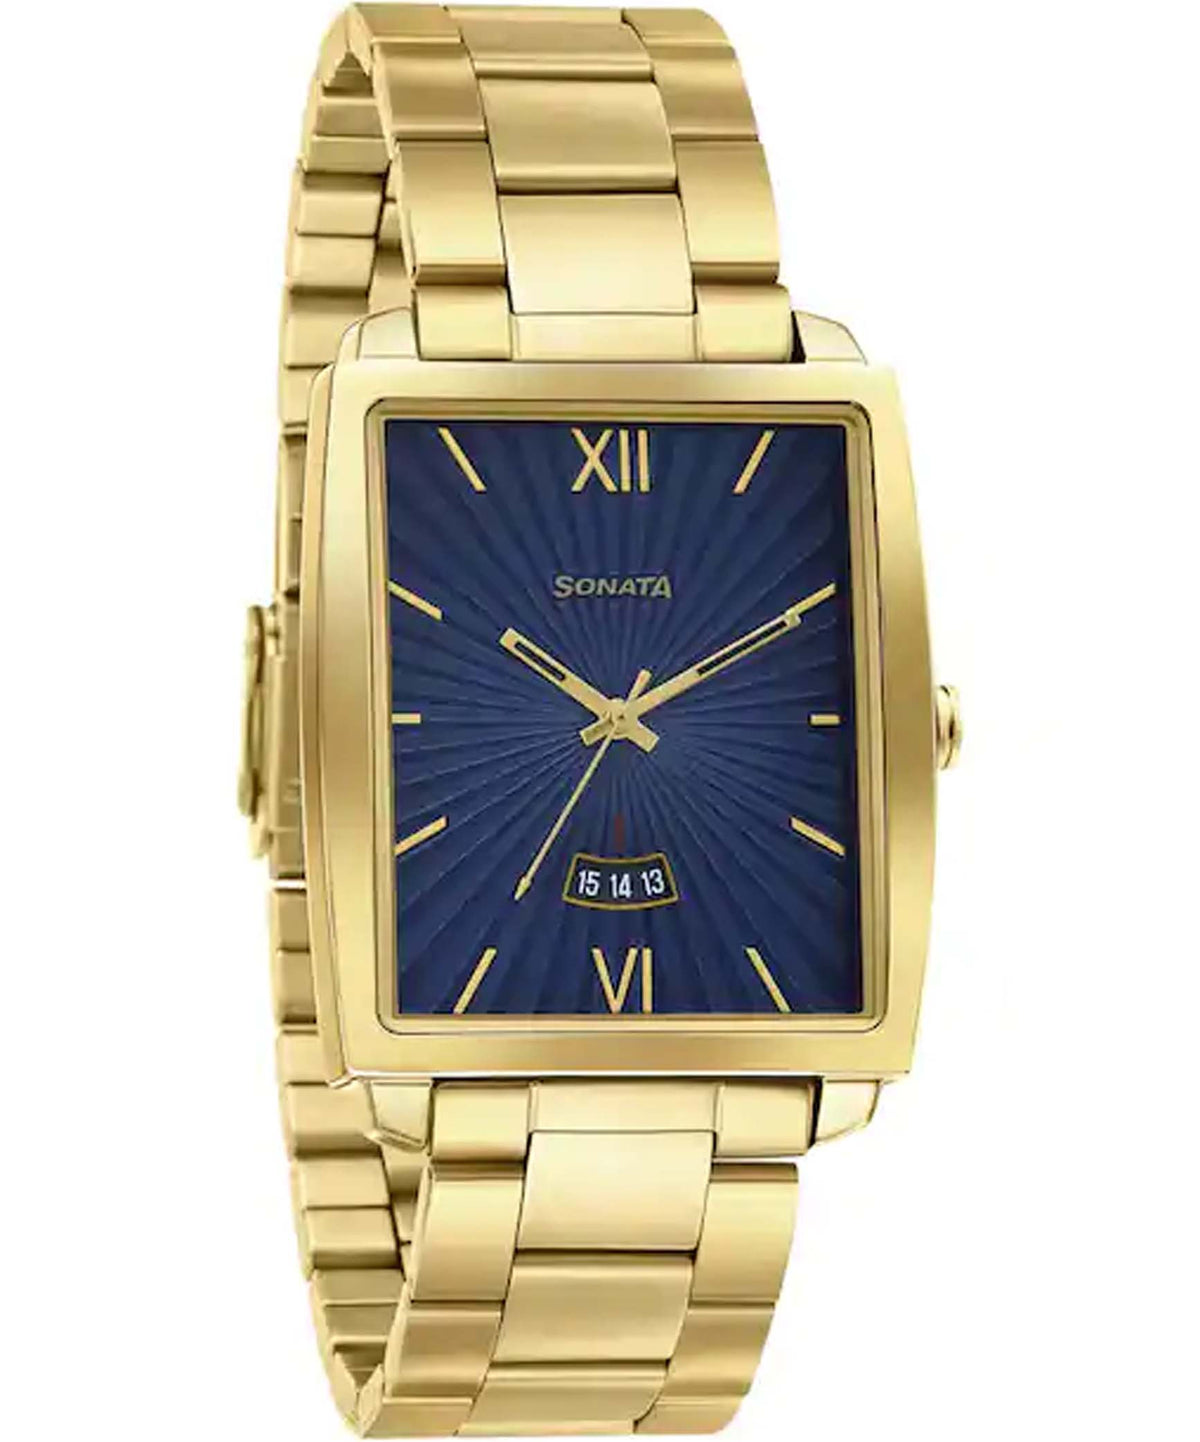 Sonata Men's Analog Blue Dial Gold Stainless Steel Strap Watch, 7143YM01